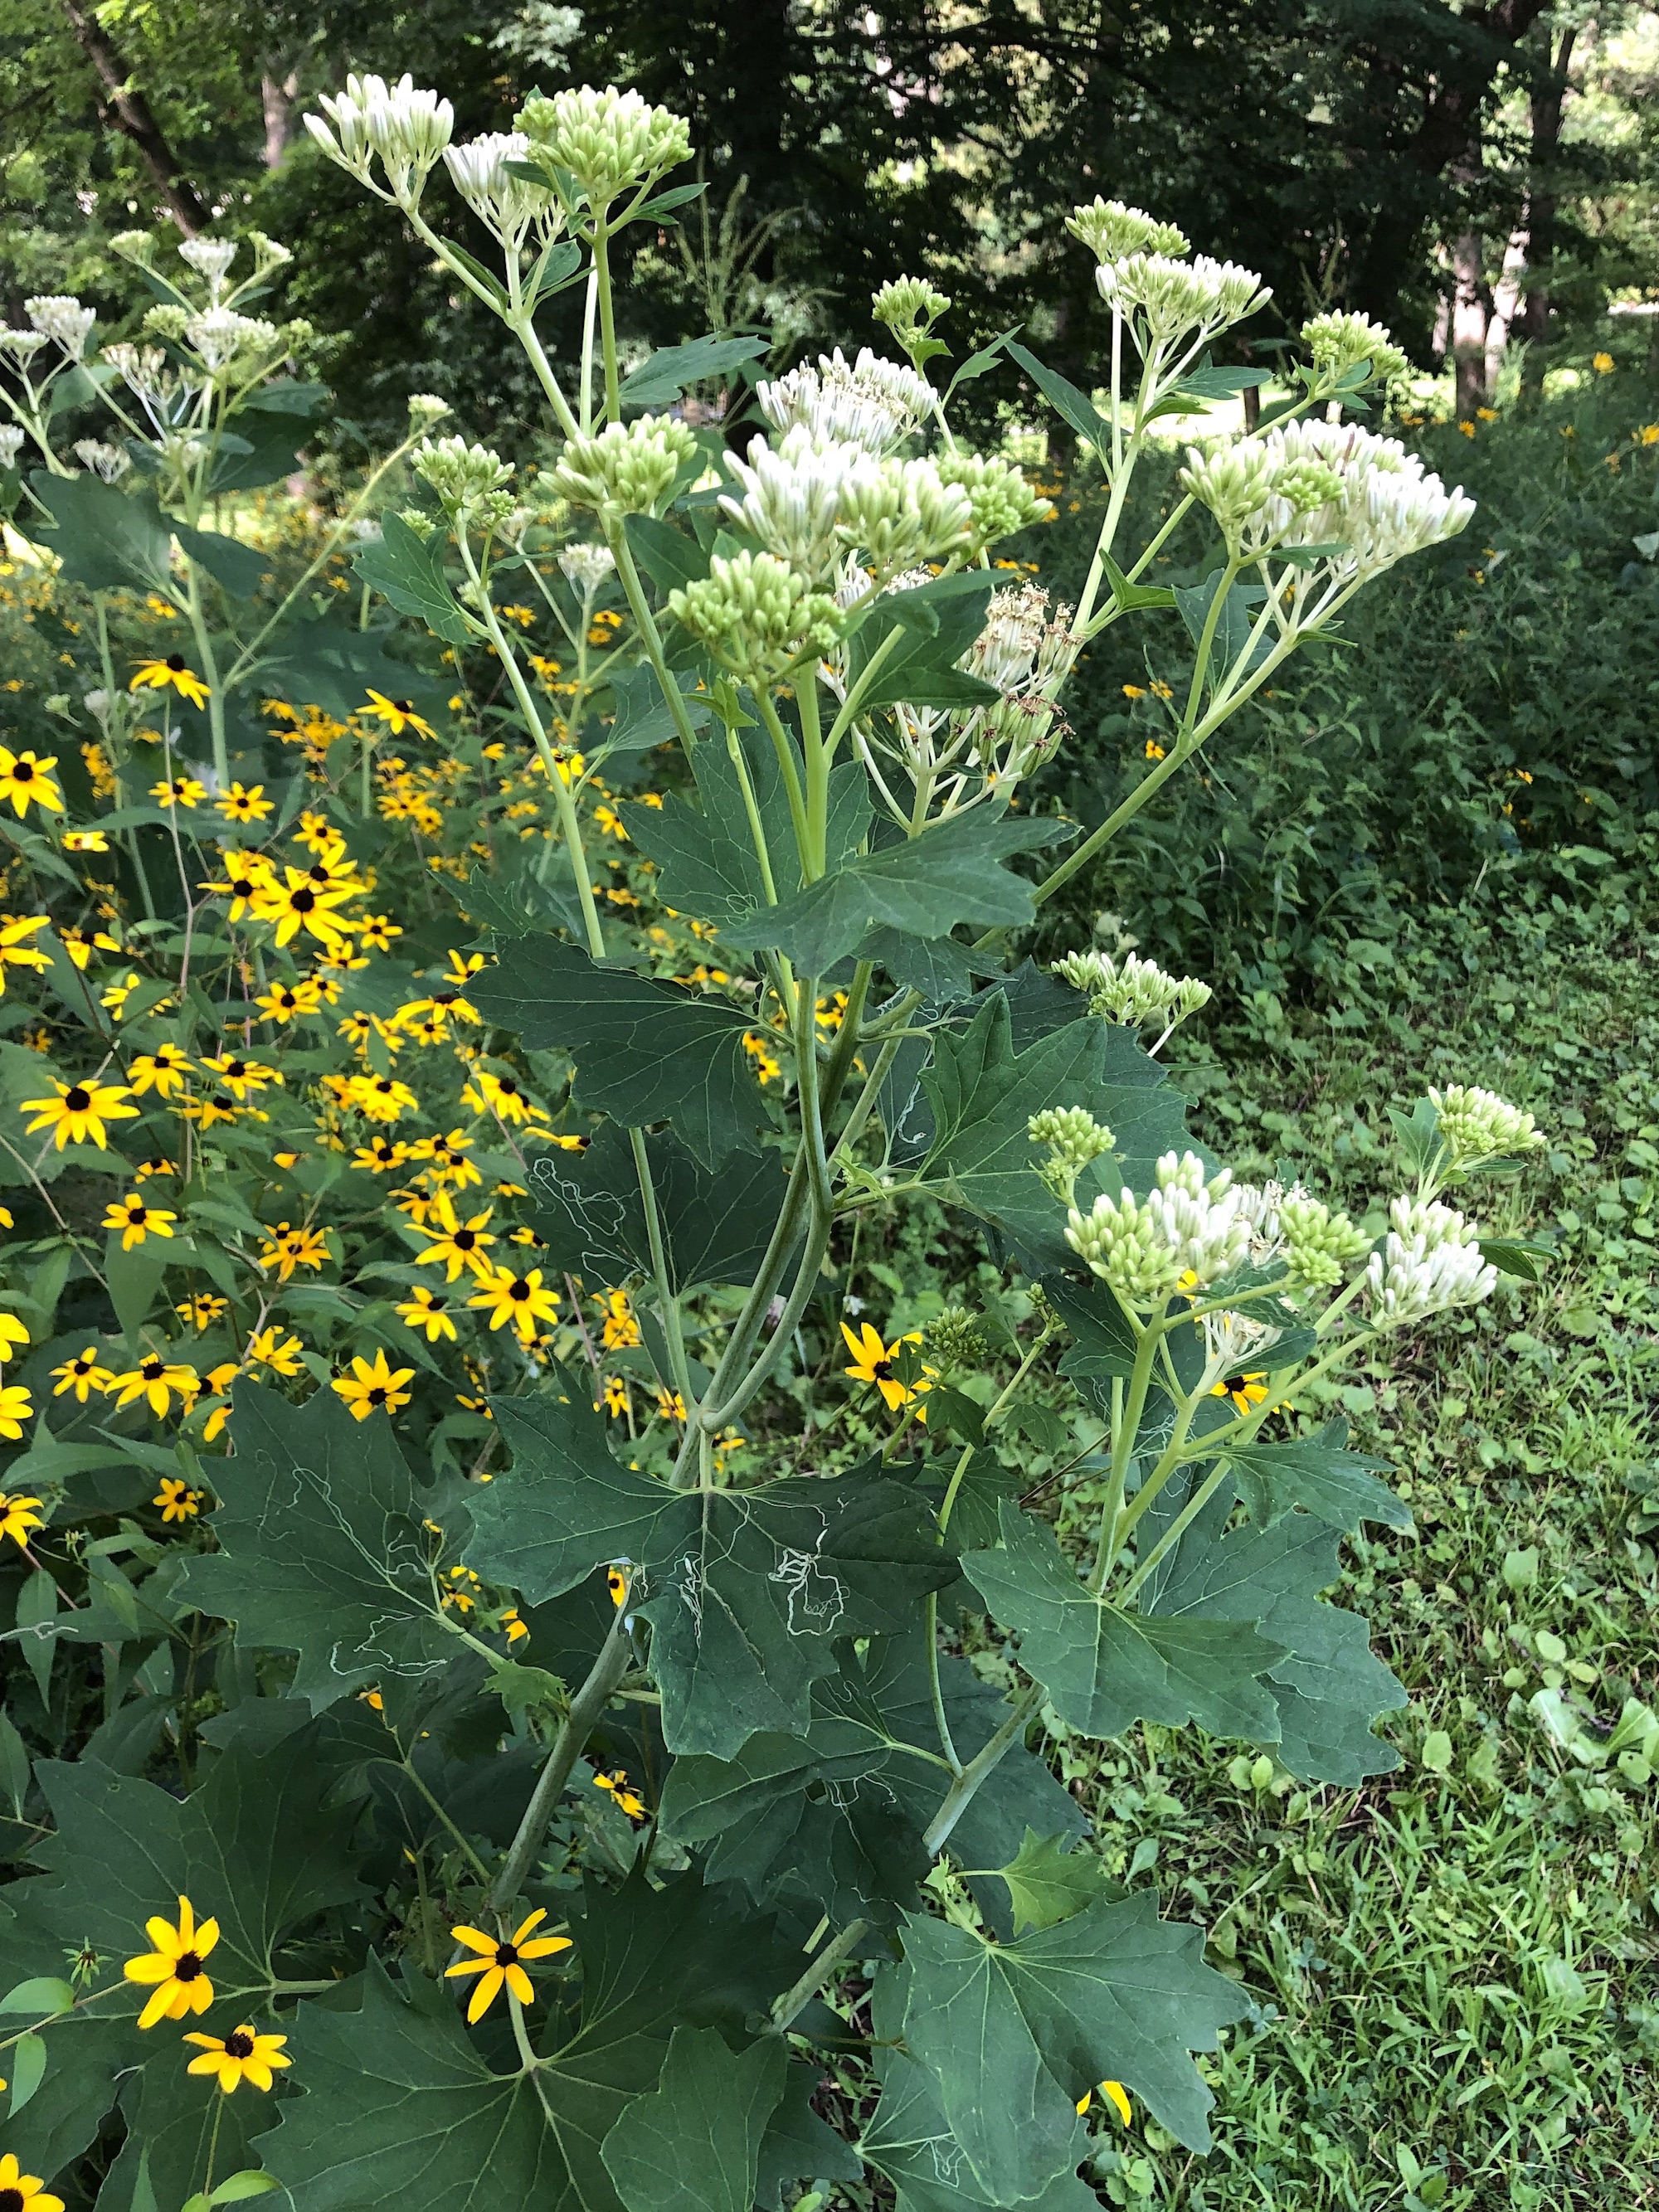 Pale Indian Plantain on edge of woods in Nakoma Park in Madison, Wisconsin on August 18, 2019.